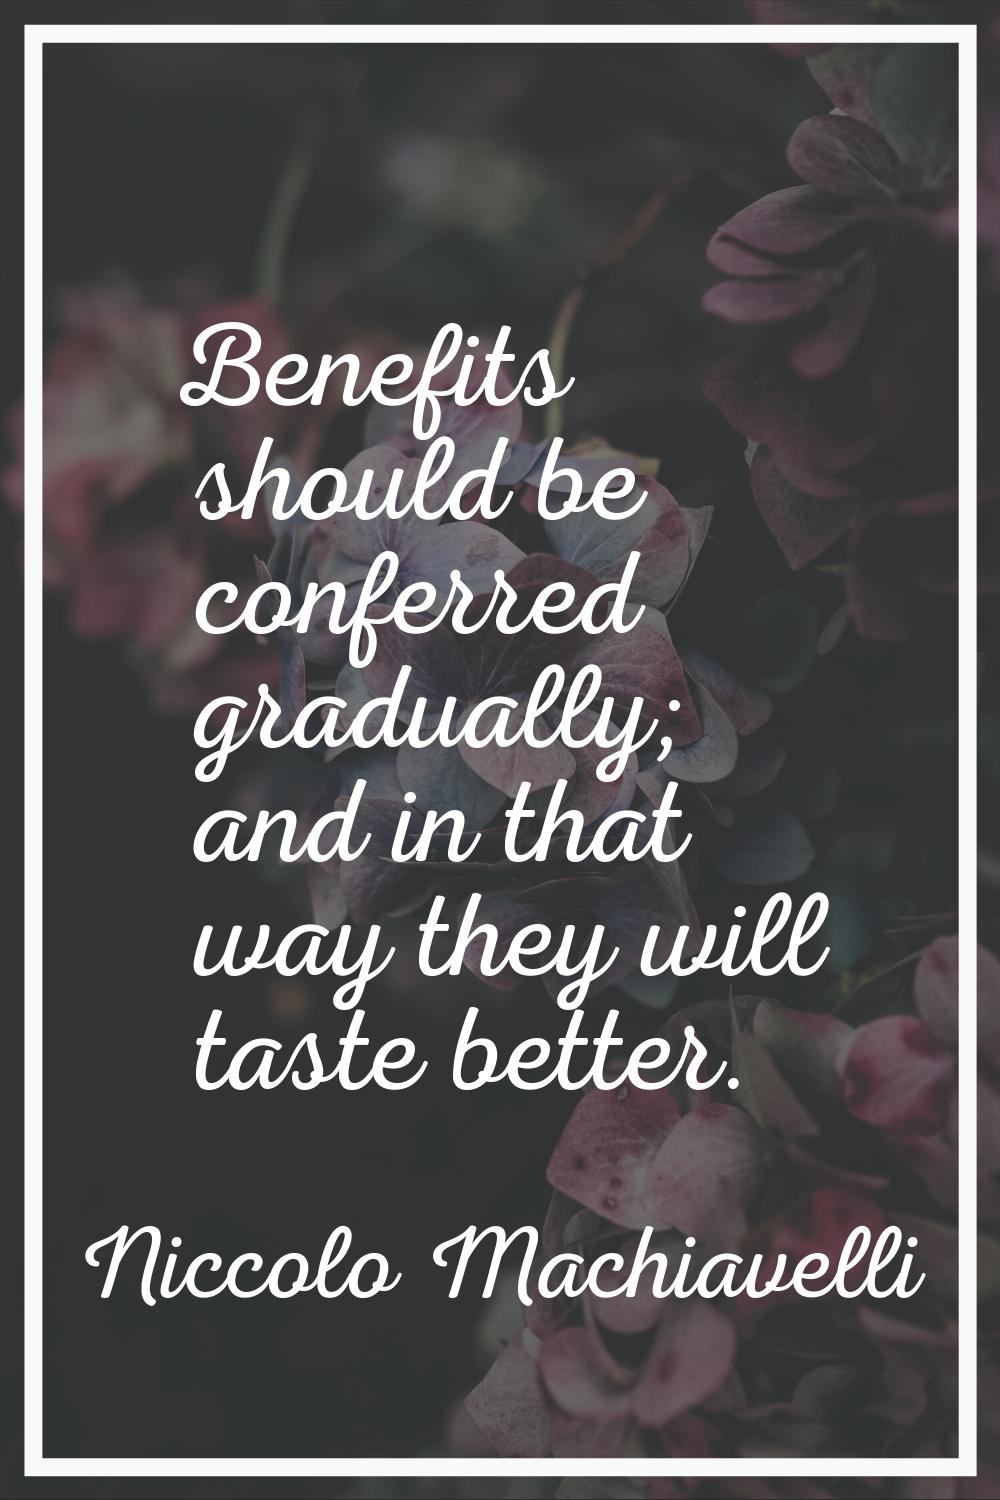 Benefits should be conferred gradually; and in that way they will taste better.